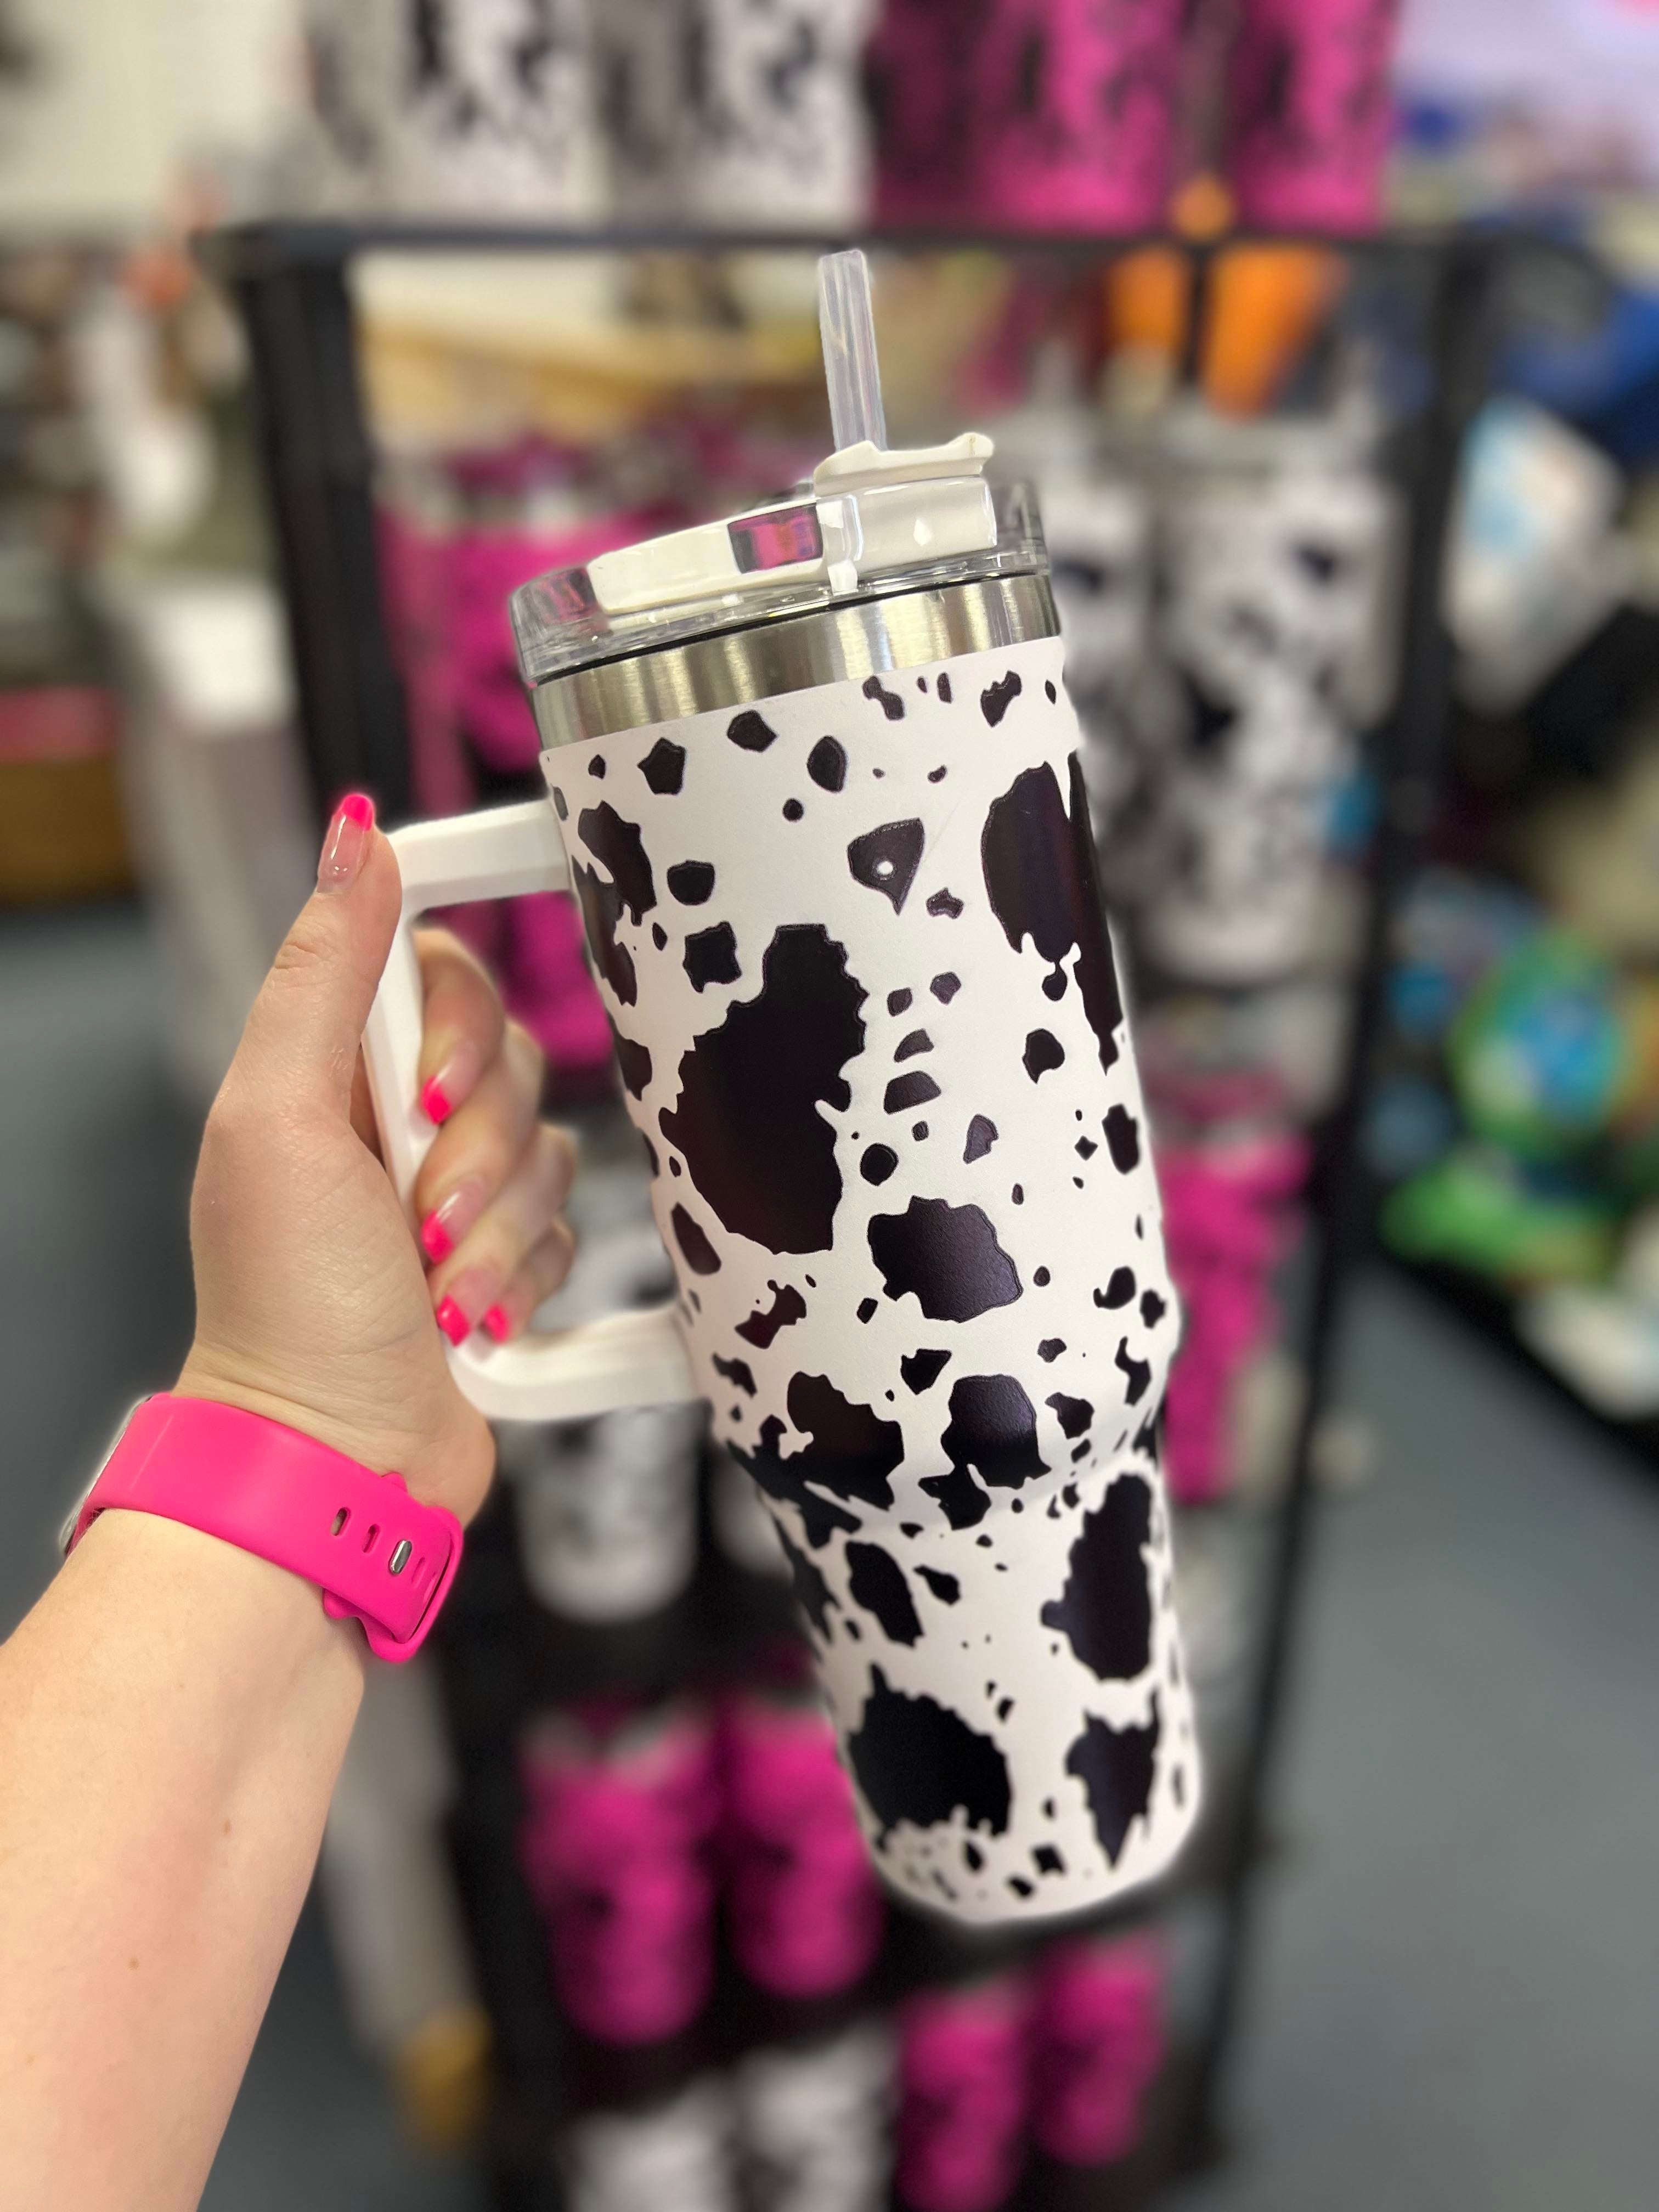 QEAGVJ 40oz Cow print Insulated Tumbler With Lid and Straws,Stainless Steel  Coffee Tumbler with hand…See more QEAGVJ 40oz Cow print Insulated Tumbler